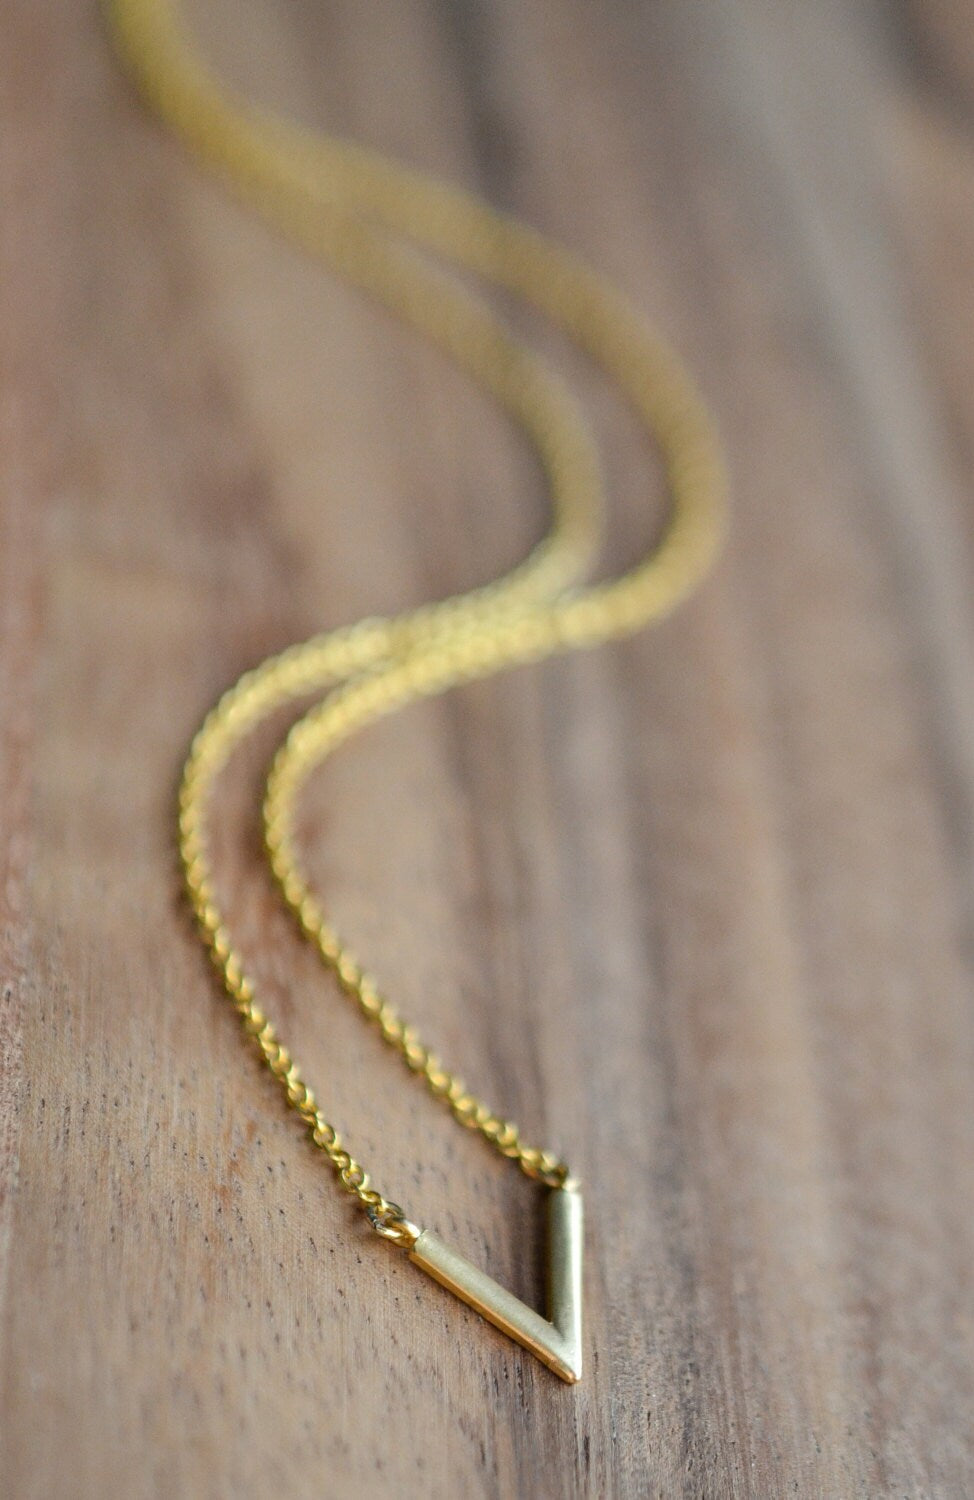 Gold V Necklace // Gold Chevron Necklace  // Simple Gold V Pendant Necklace // GIFT For Her // Geometric // Bridesmaid Gift